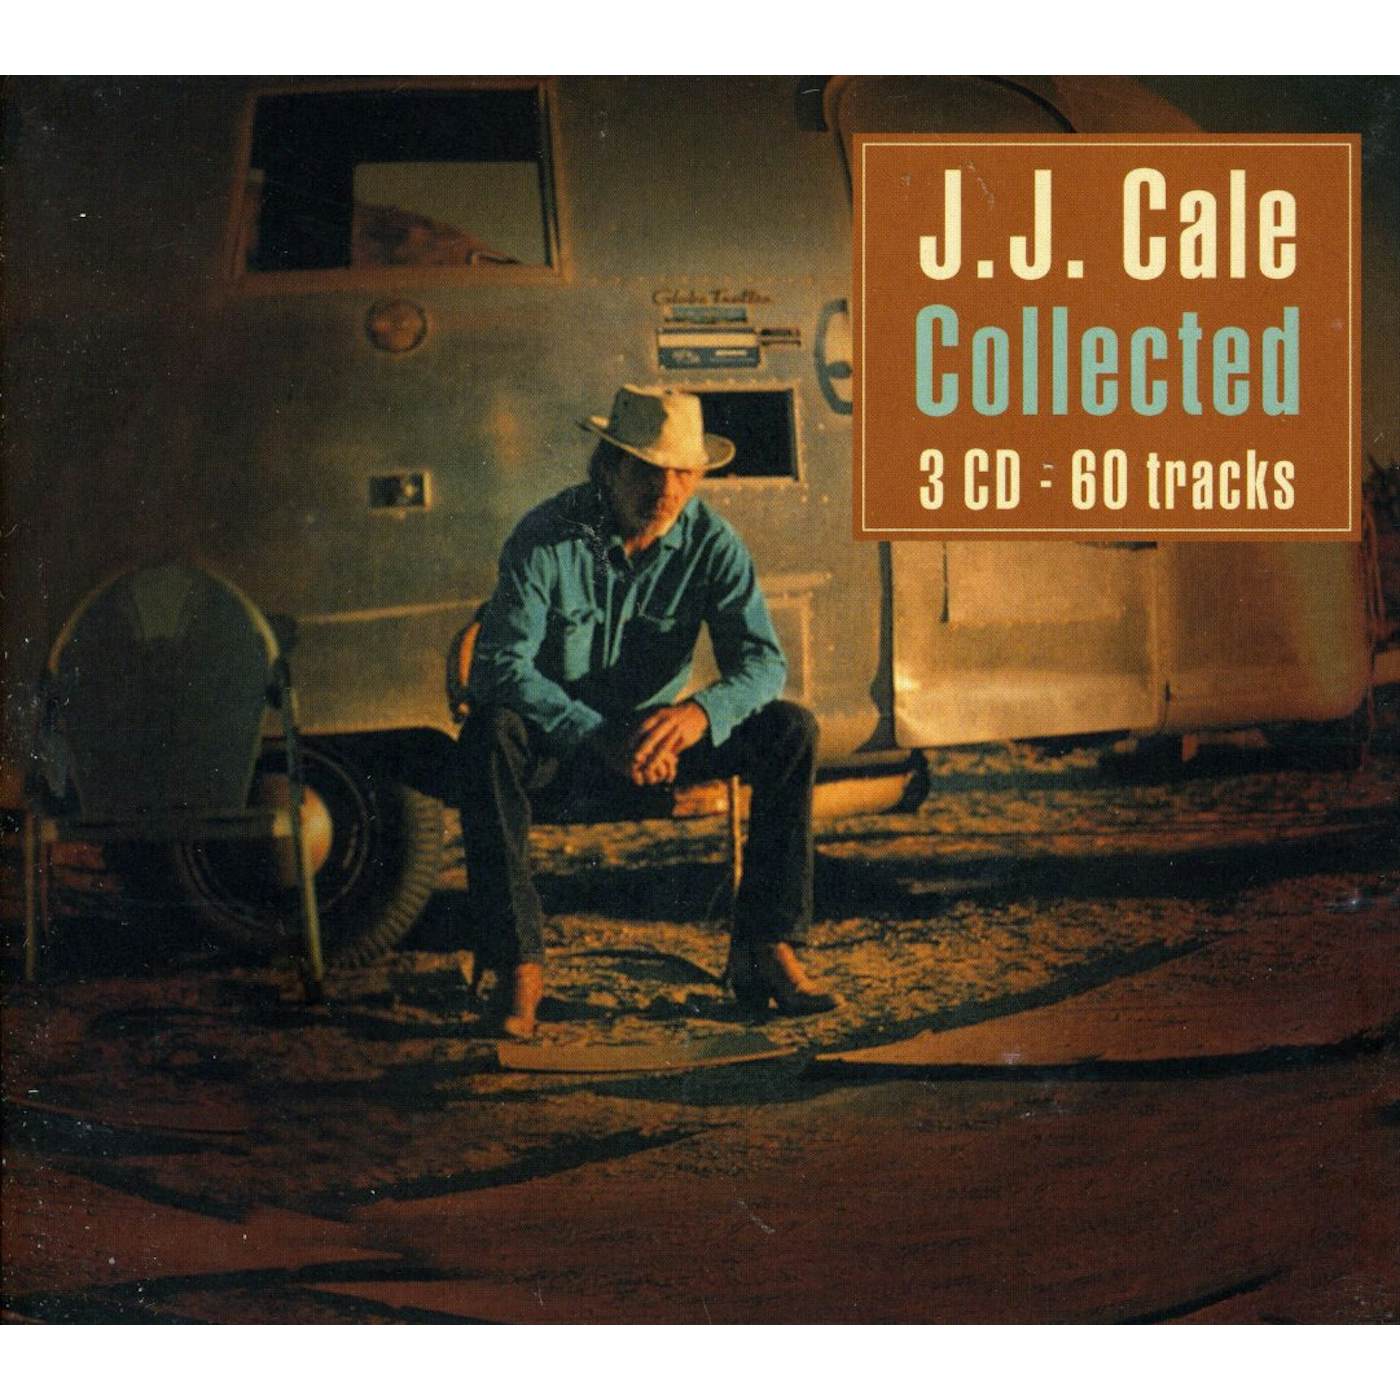 J.J. Cale COLLECTED CD